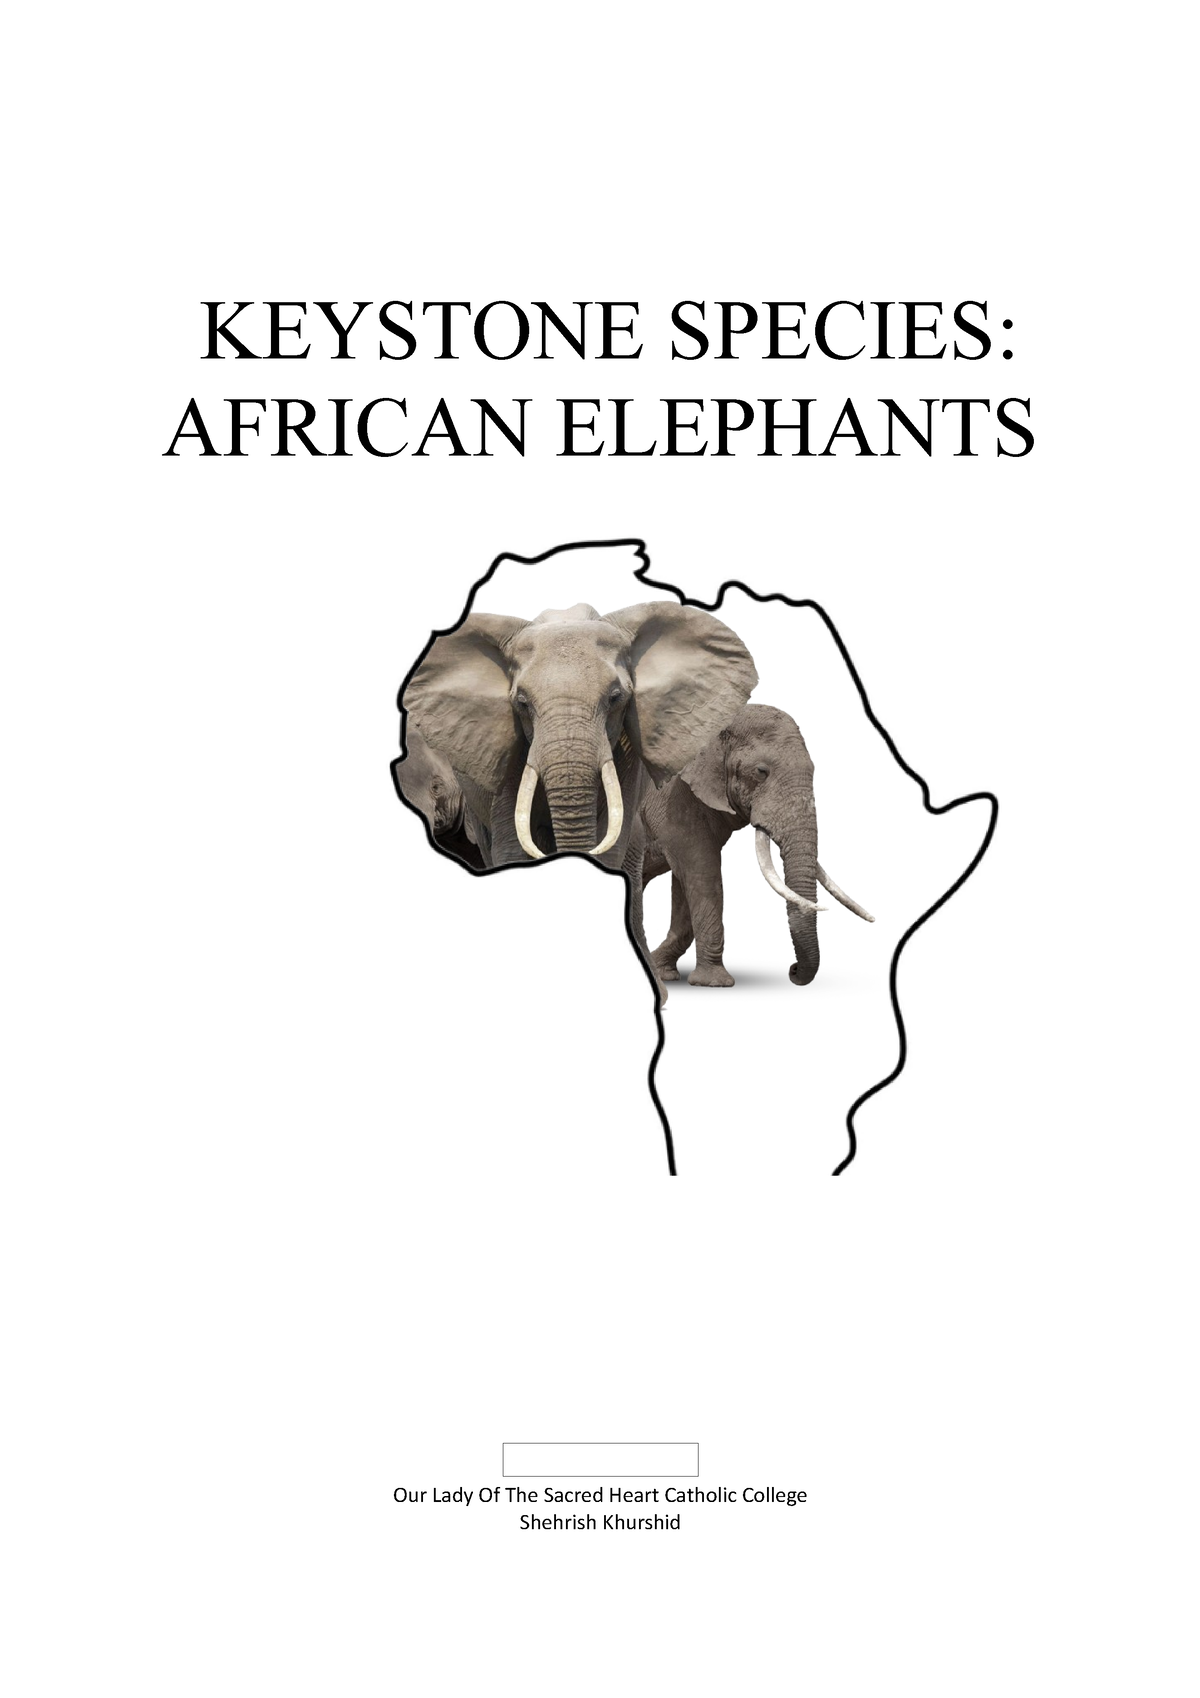 African elephant, facts and photos